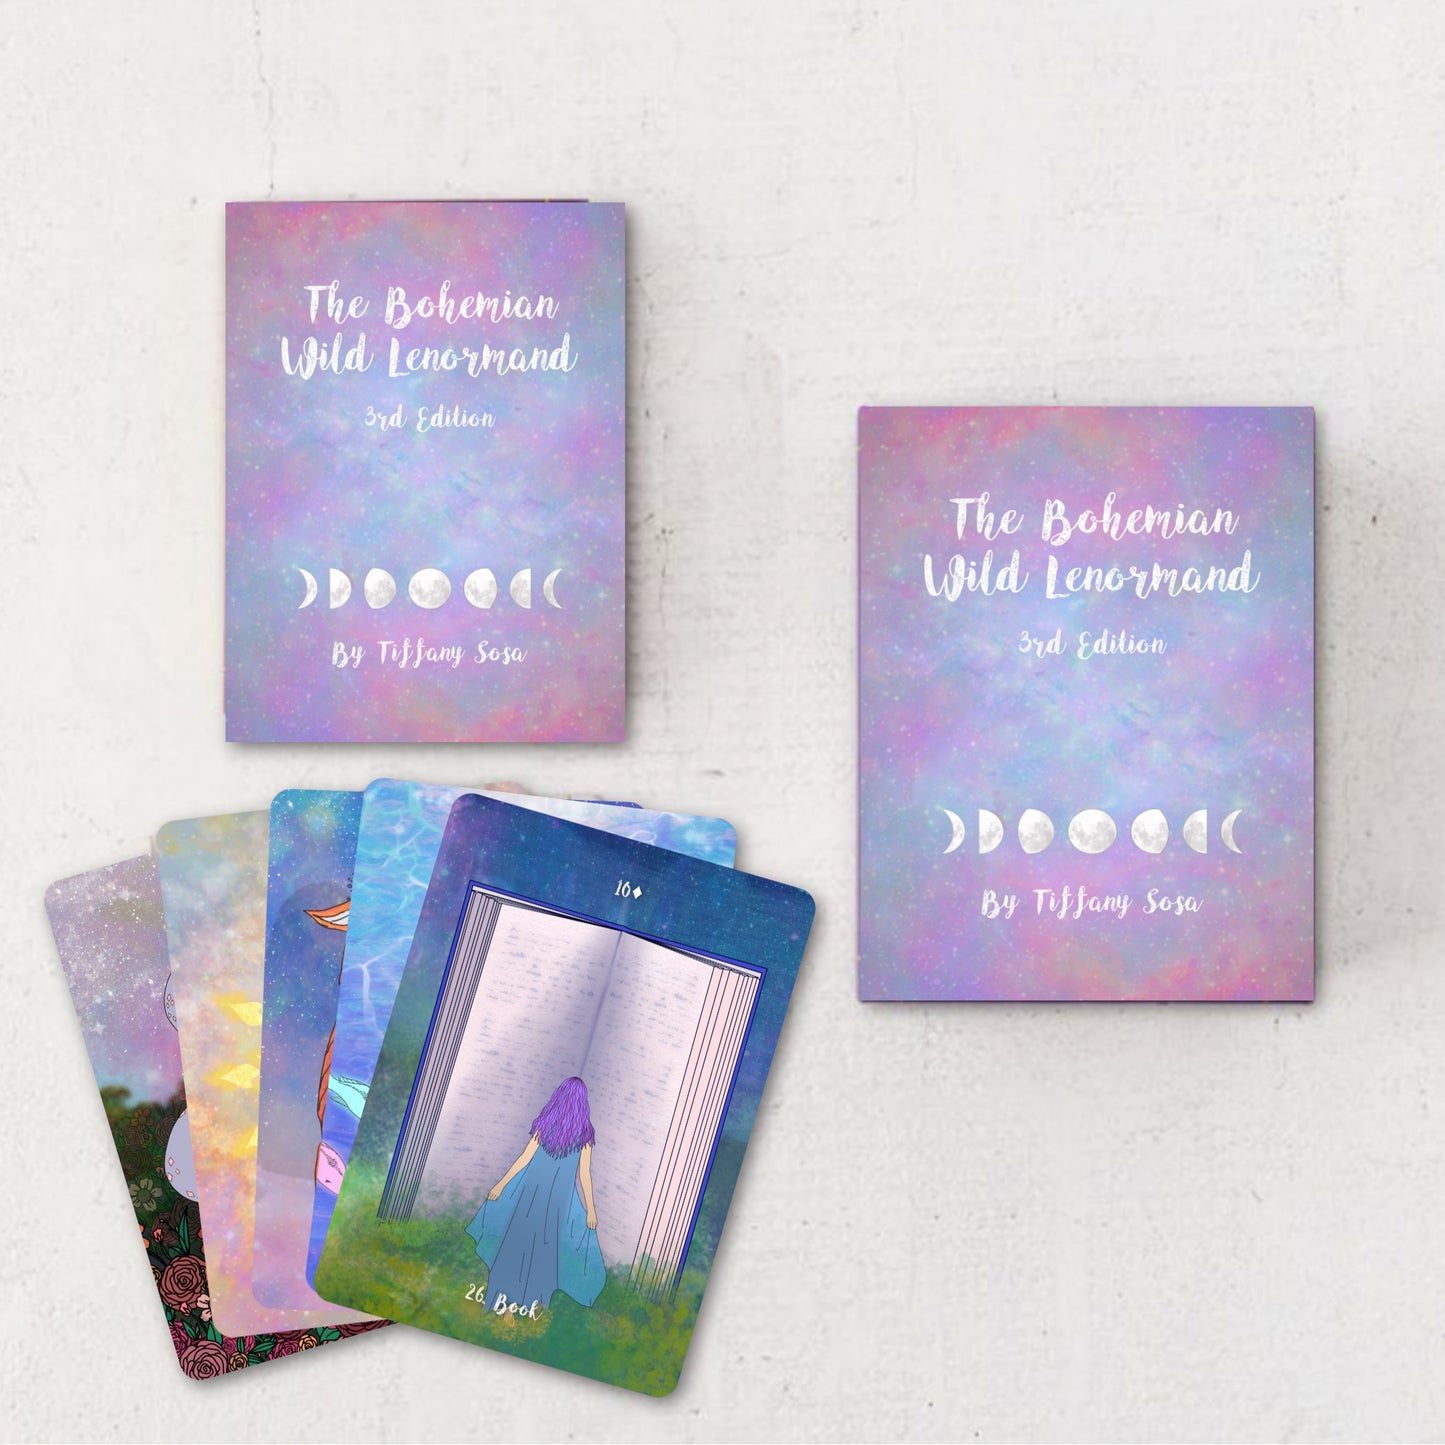 The Bohemian Wild Lenormand 3rd Edition